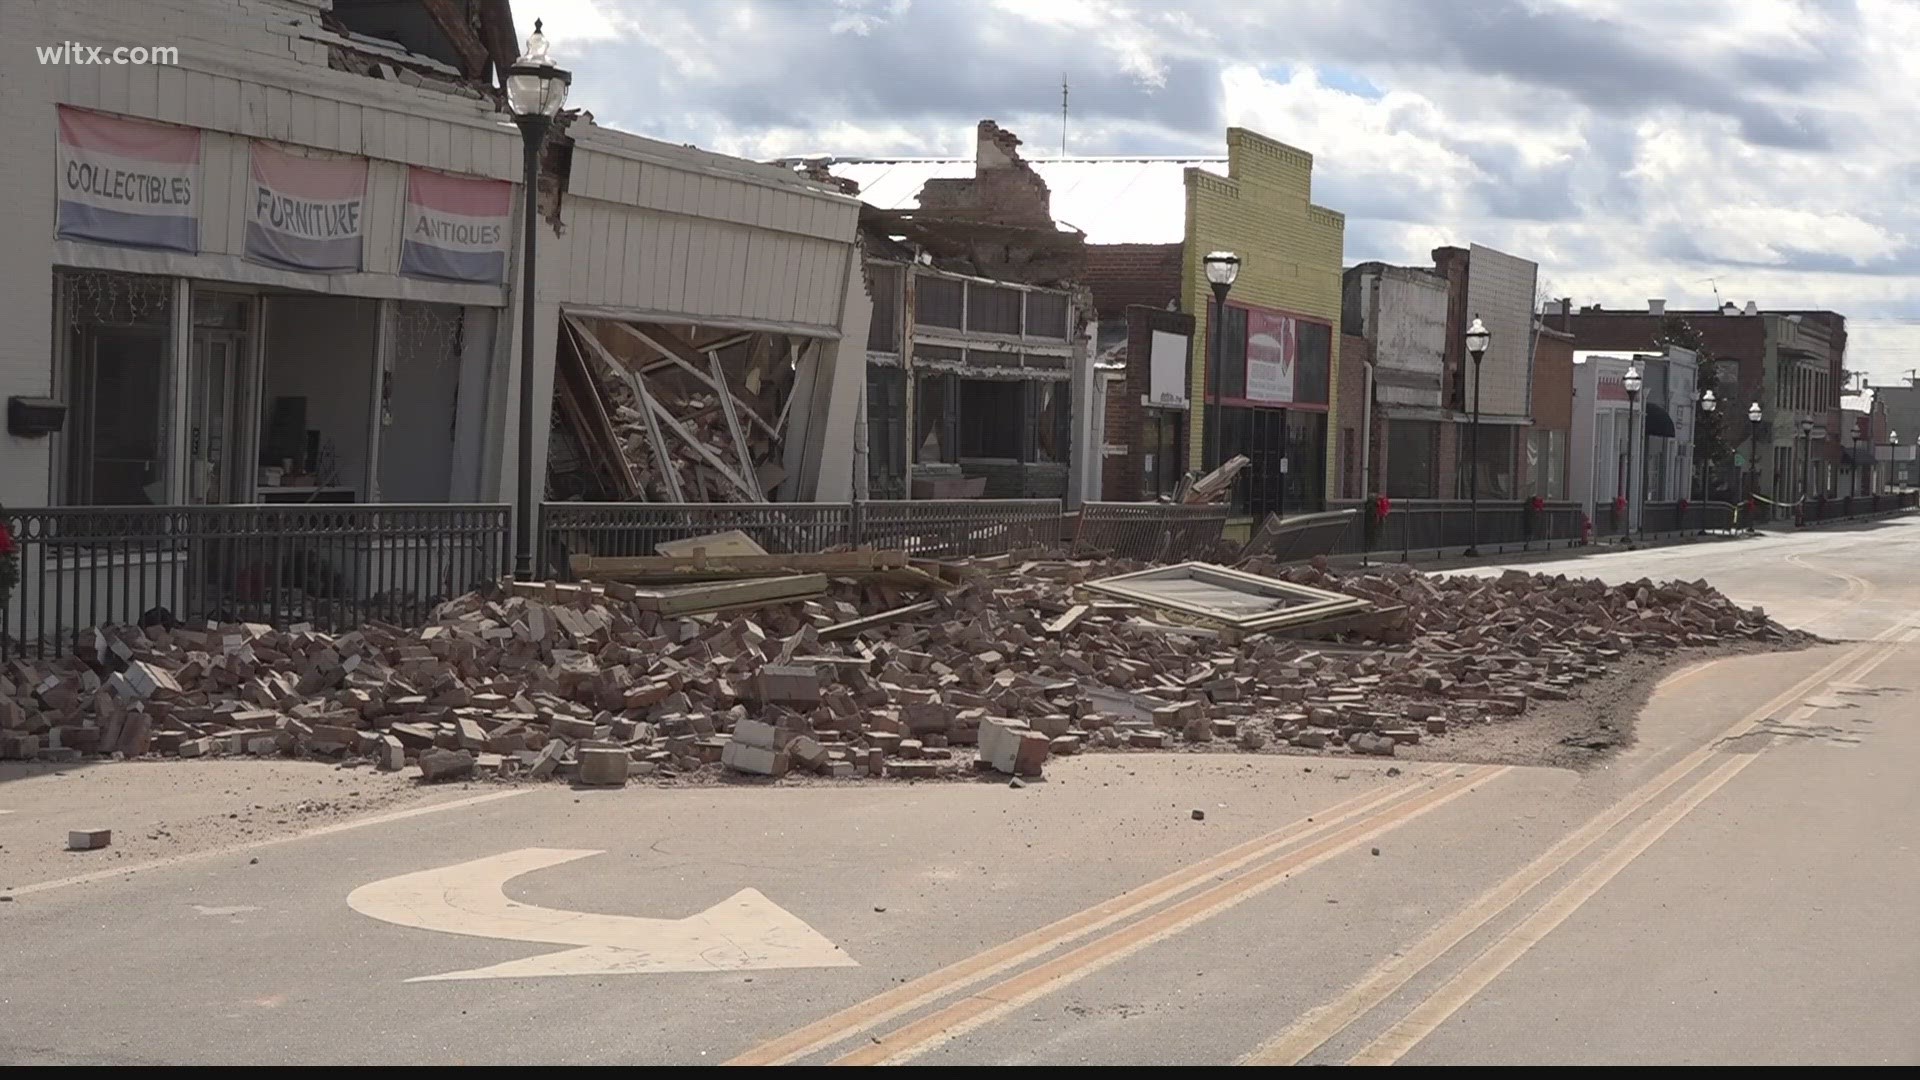 Local administrators don't believe the downtown buildings can be rebuilt.